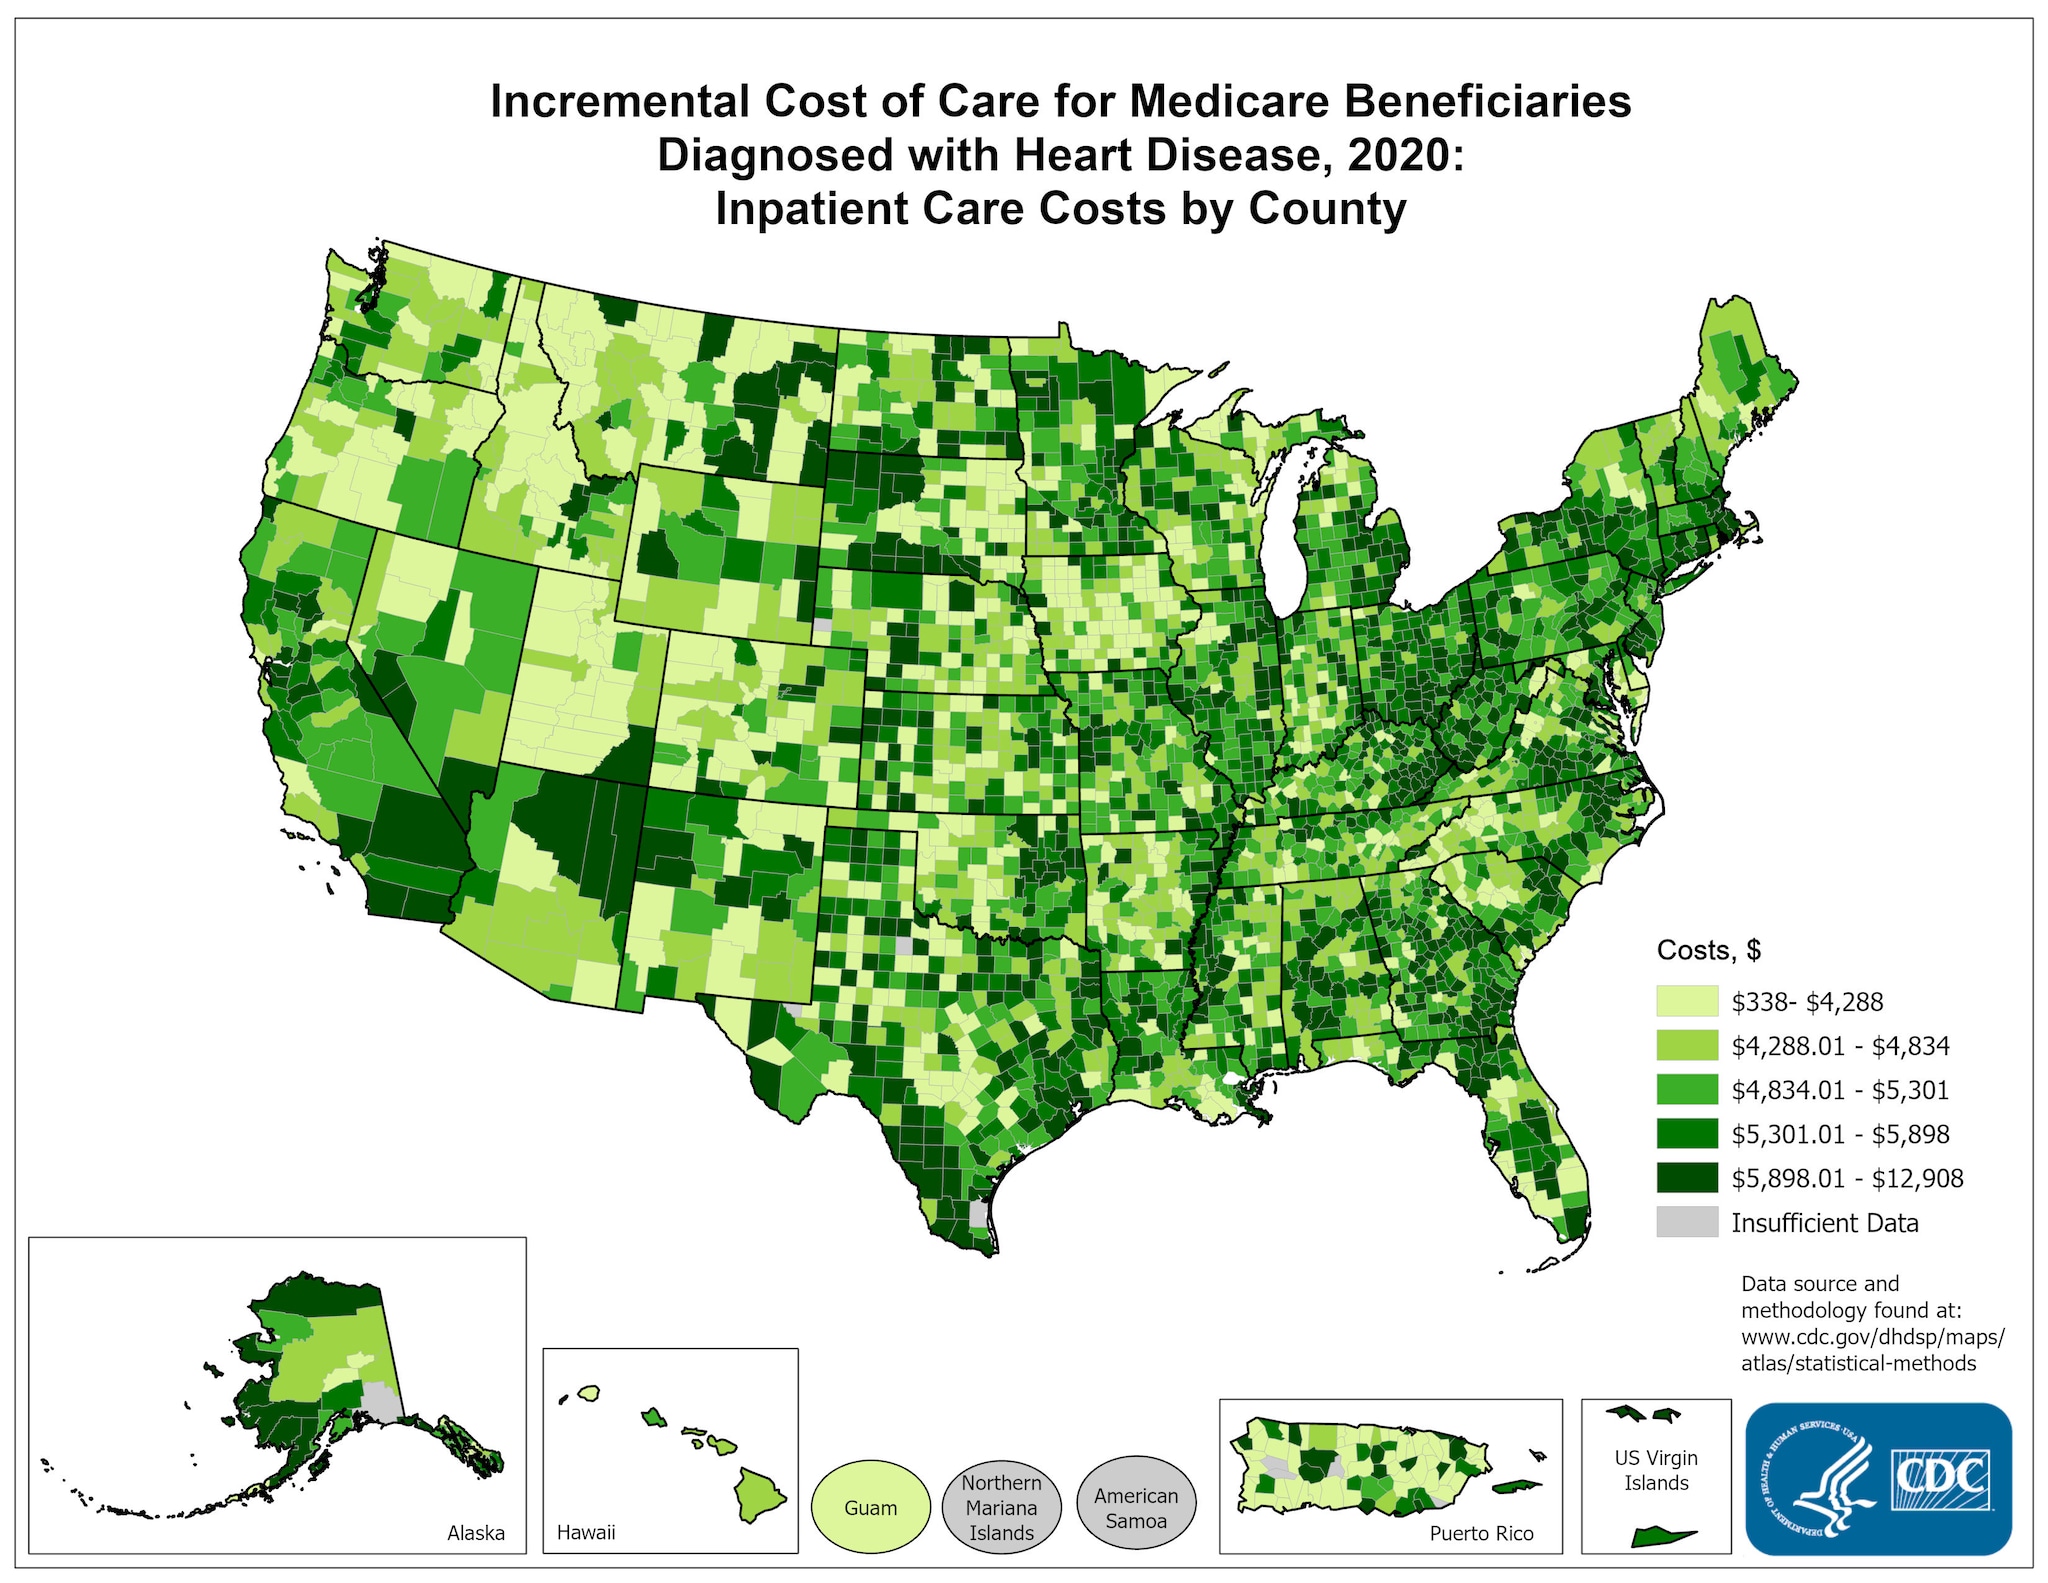 Incremental Costs of Care per Capita for FFS Medicare beneficiaries diagnosed with Heart Disease, 2015: Inpatient Costs, by county. This map shows the concentrations of counties with the highest incremental inpatient costs per capita – meaning the top quintile – are located primarily in southern California, southern Texas, Kentucky, North Carolina, Michigan, Wyoming, and South Dakota, with pickets of counties in New York, Pennsylvania, Ohio, Illinois, Mississippi, Arkansas, West Virginia, Virginia, Montana, North Dakota, and Minnesota.